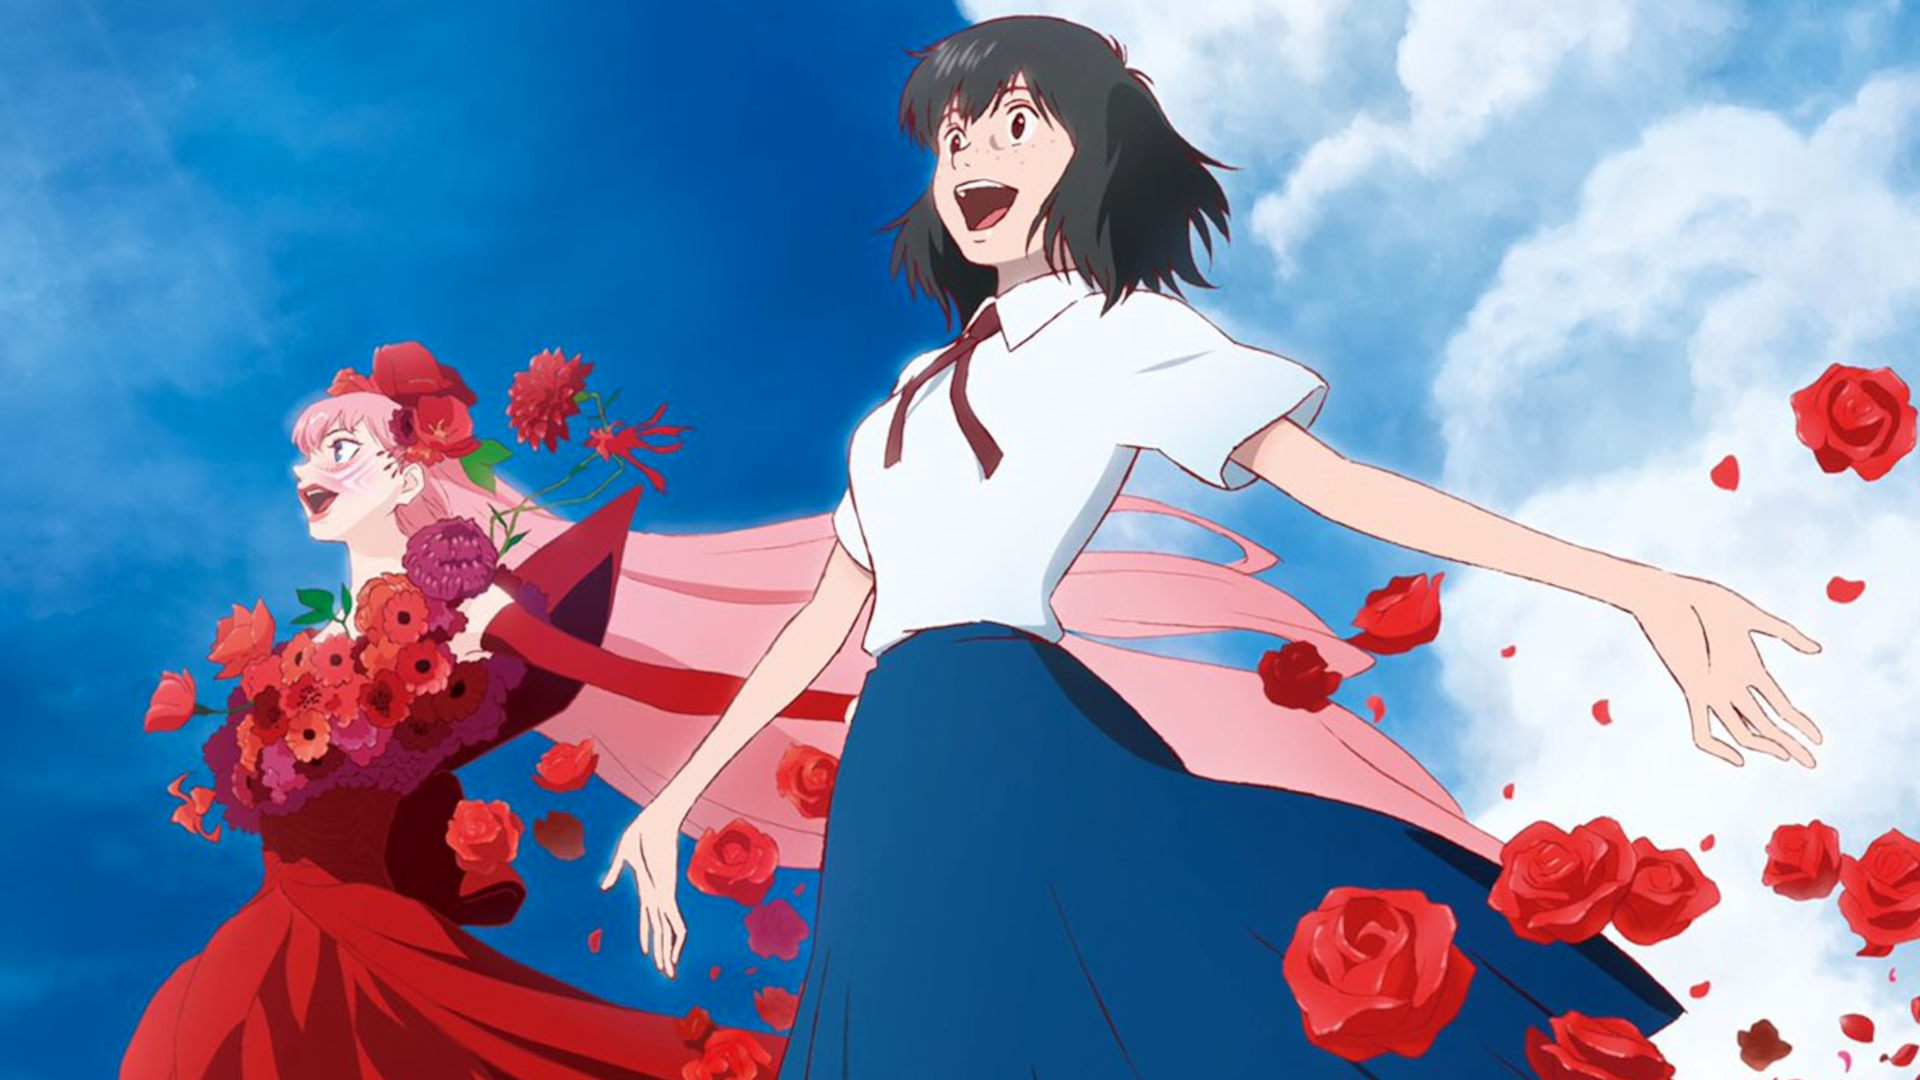 Check Out the Online World of U from the Upcoming Anime Film BELLE